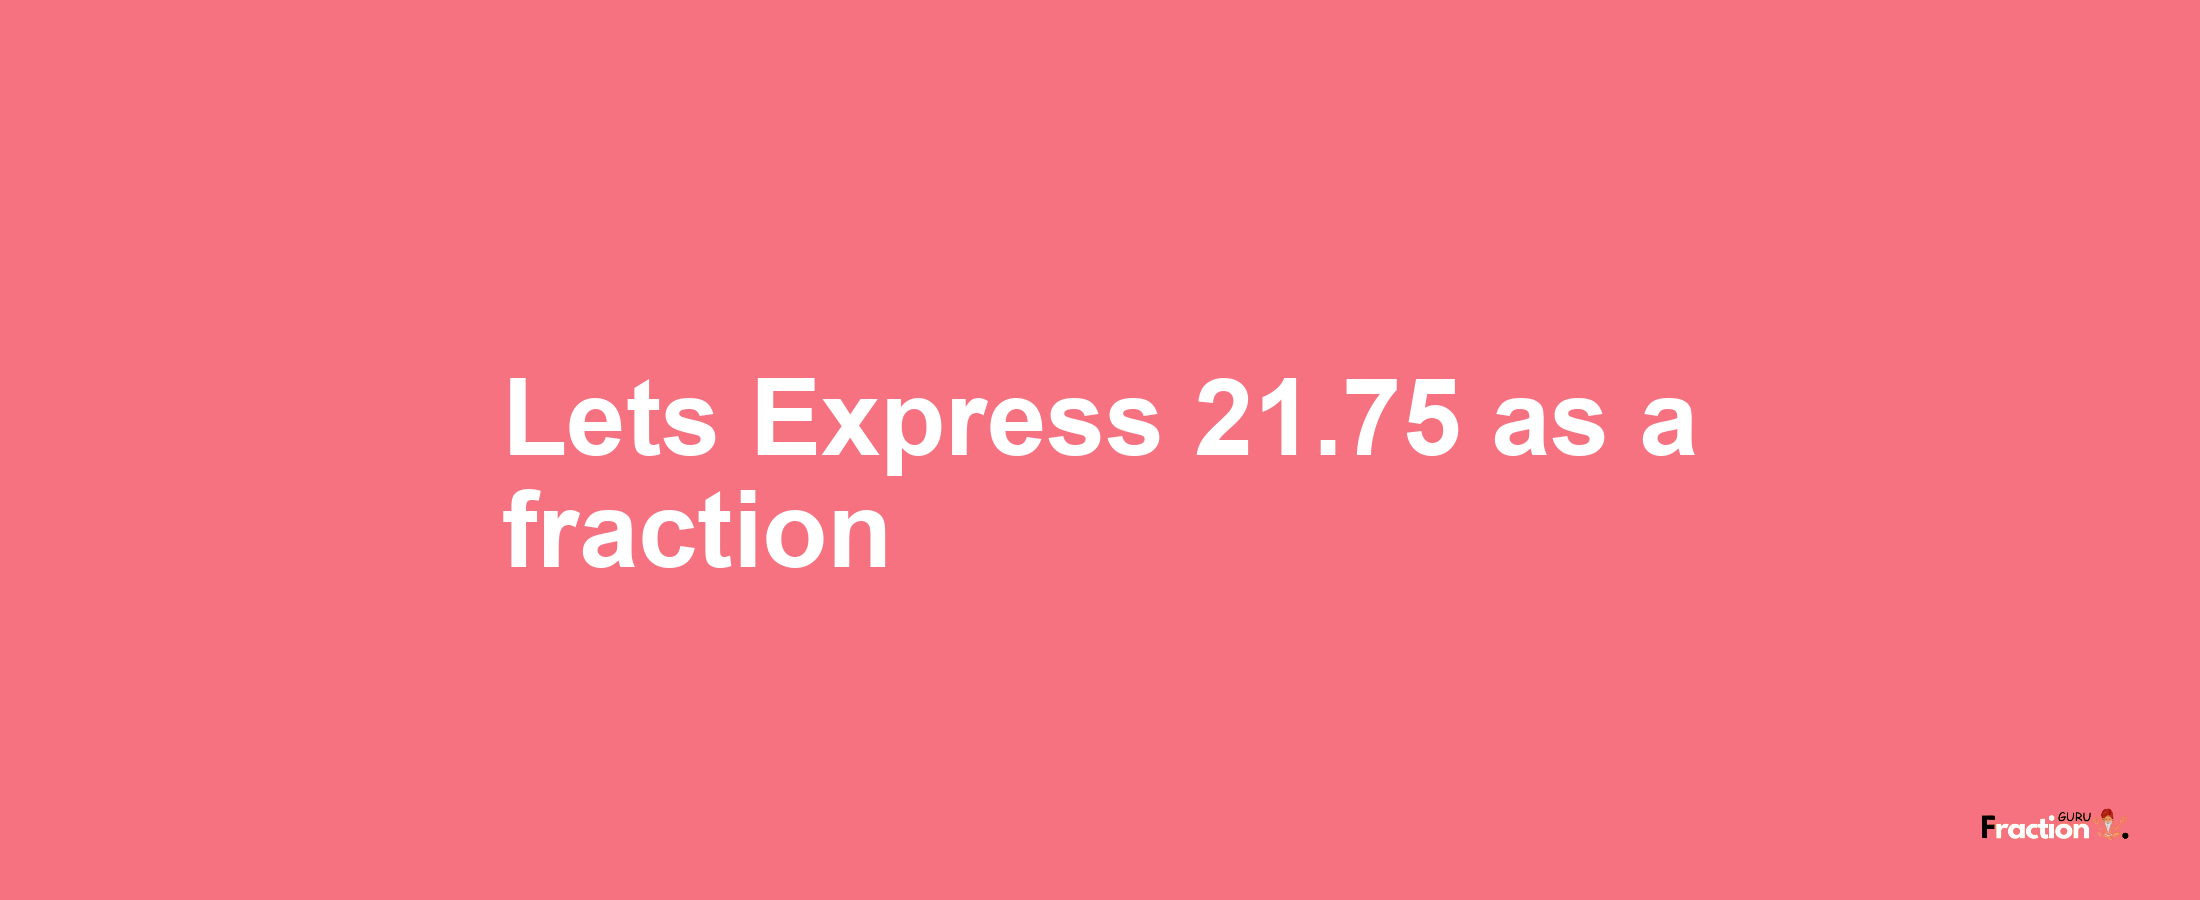 Lets Express 21.75 as afraction